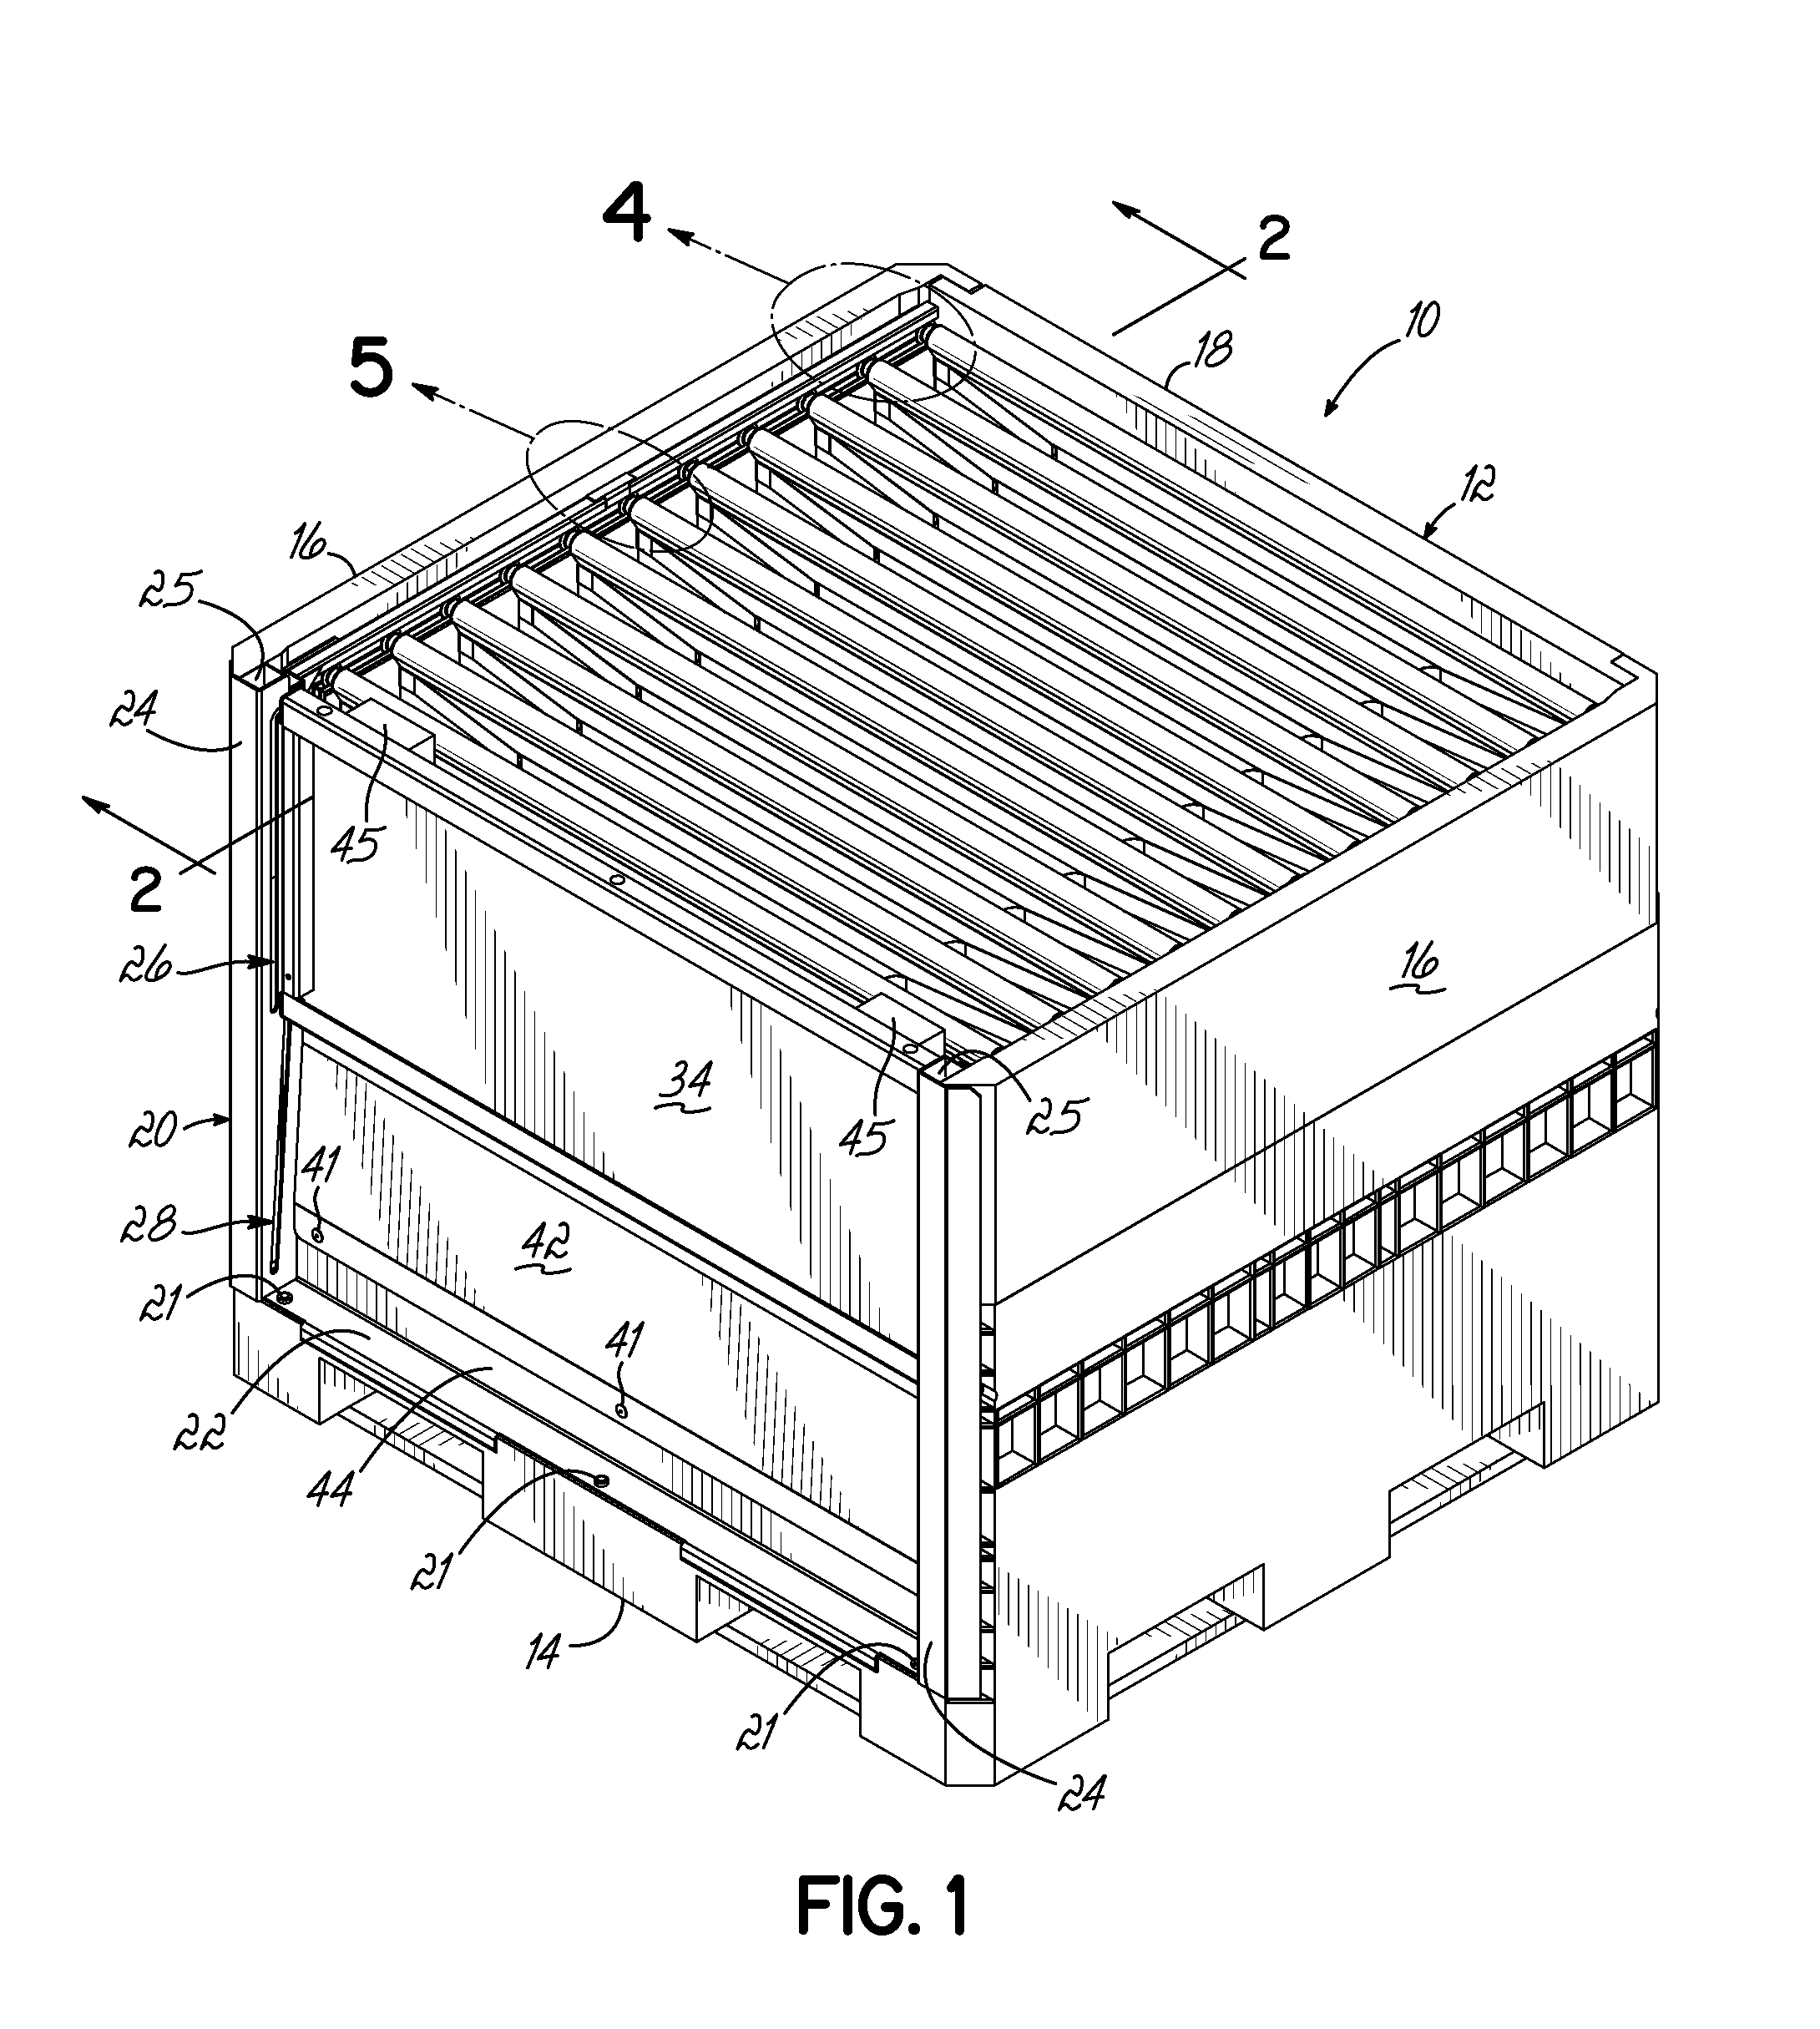 Container Having Movable Dunnage Supports For Supporting Dunnage and Movable Door